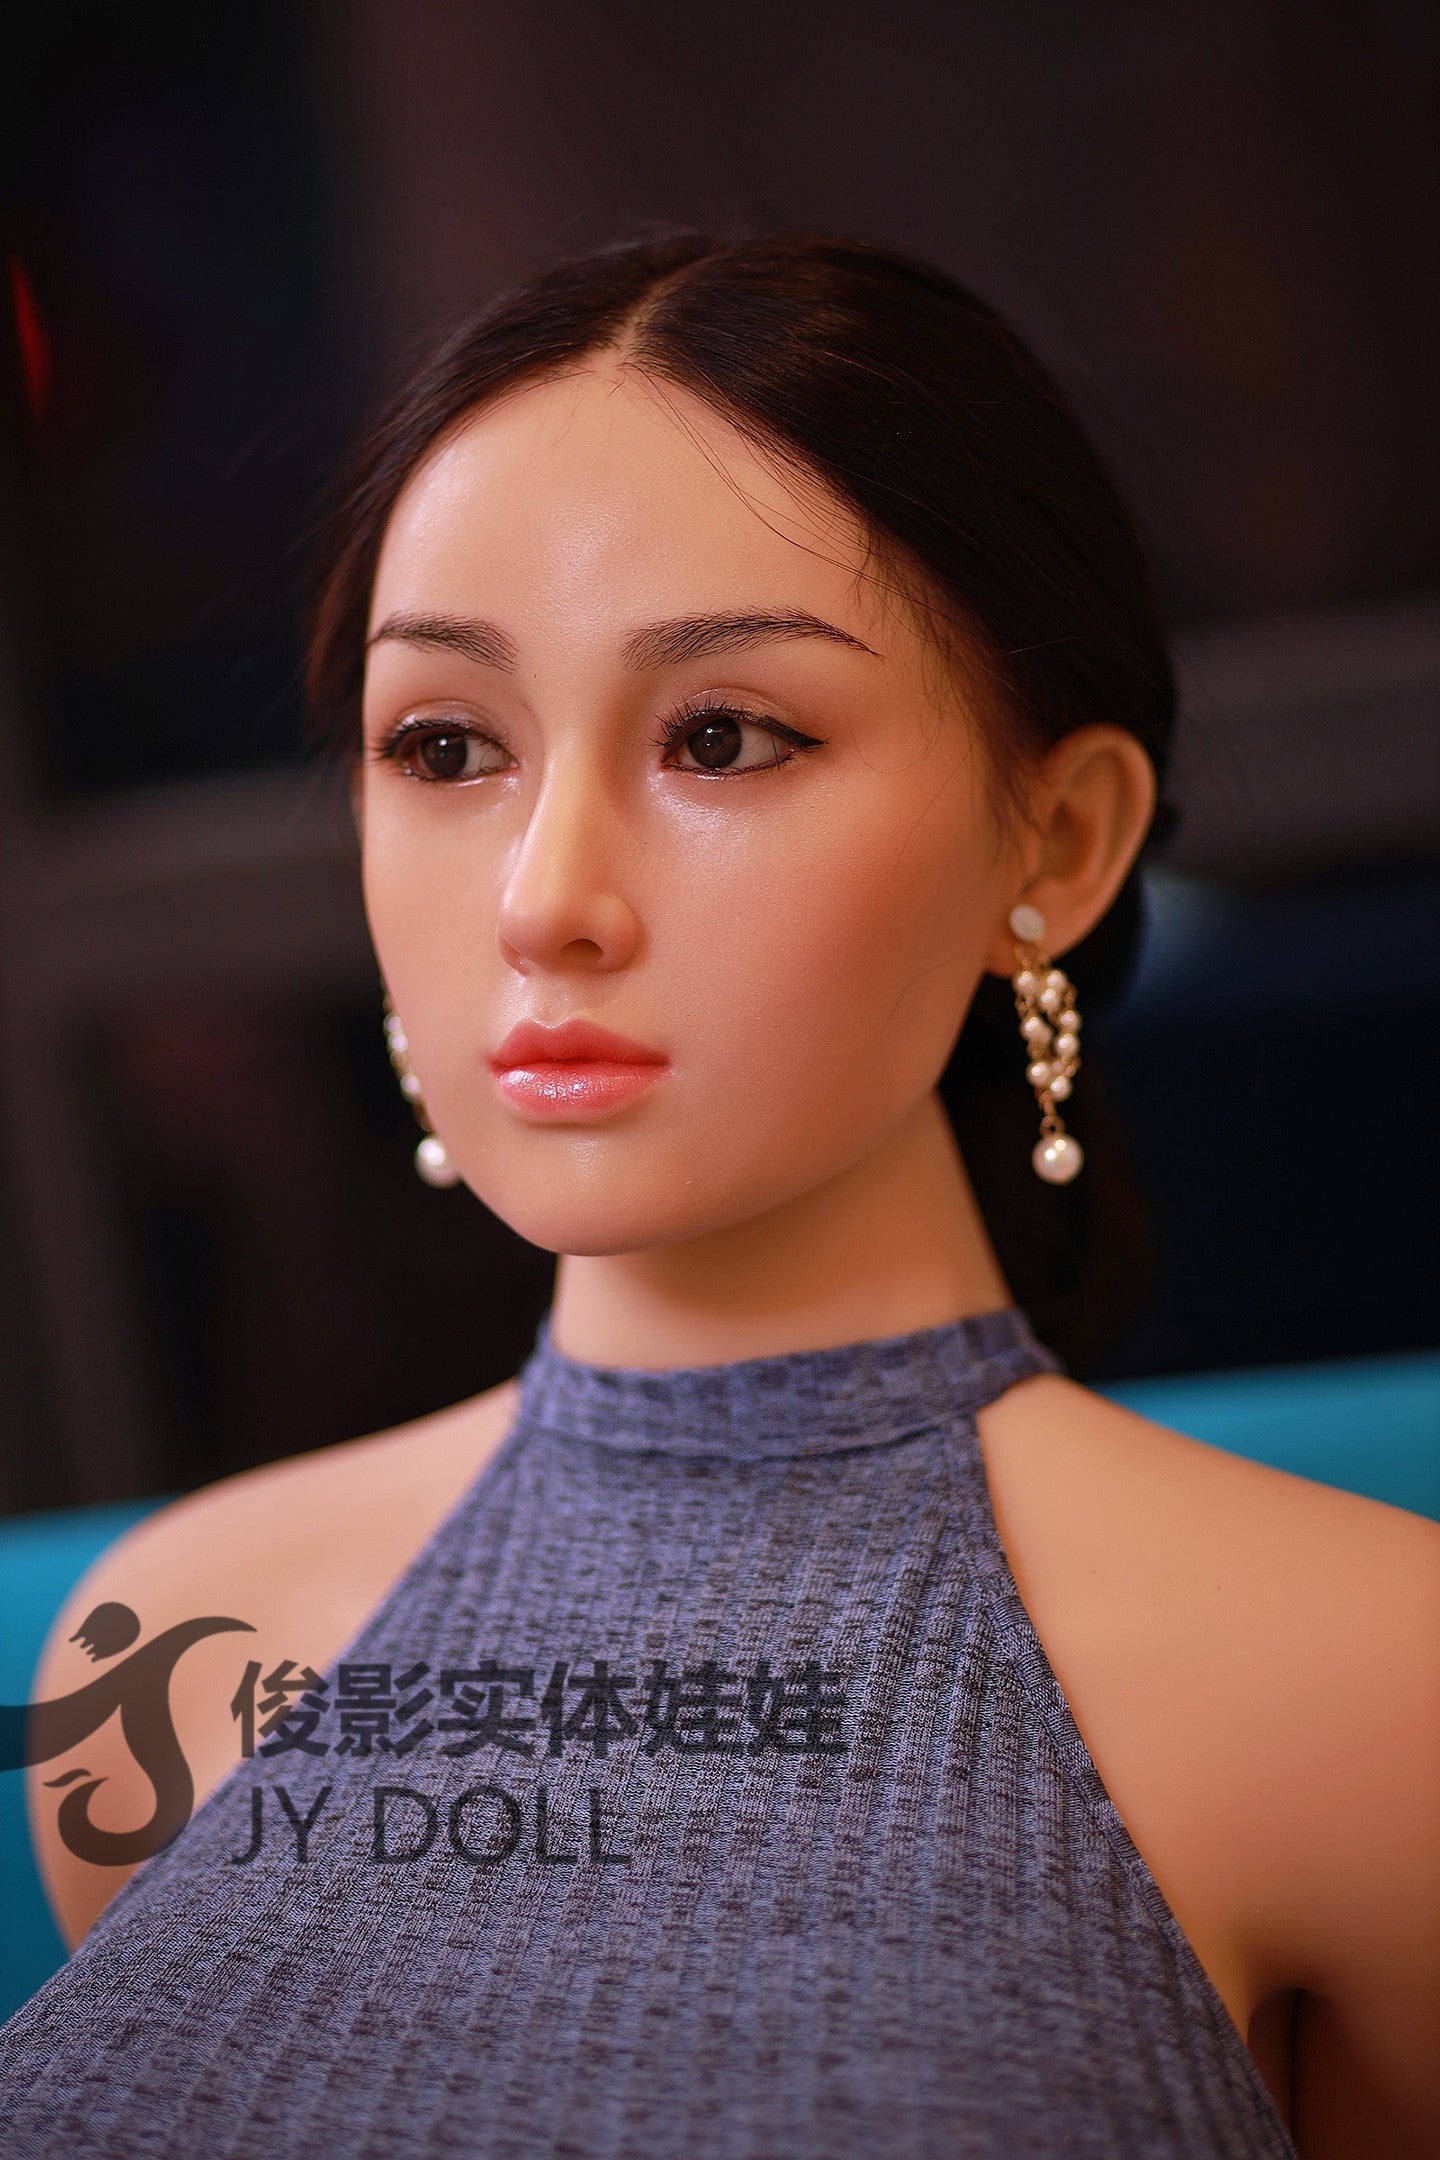 JY Doll 159 cm Fusion - Huge Breast Laura | Buy Sex Dolls at DOLLS ACTUALLY